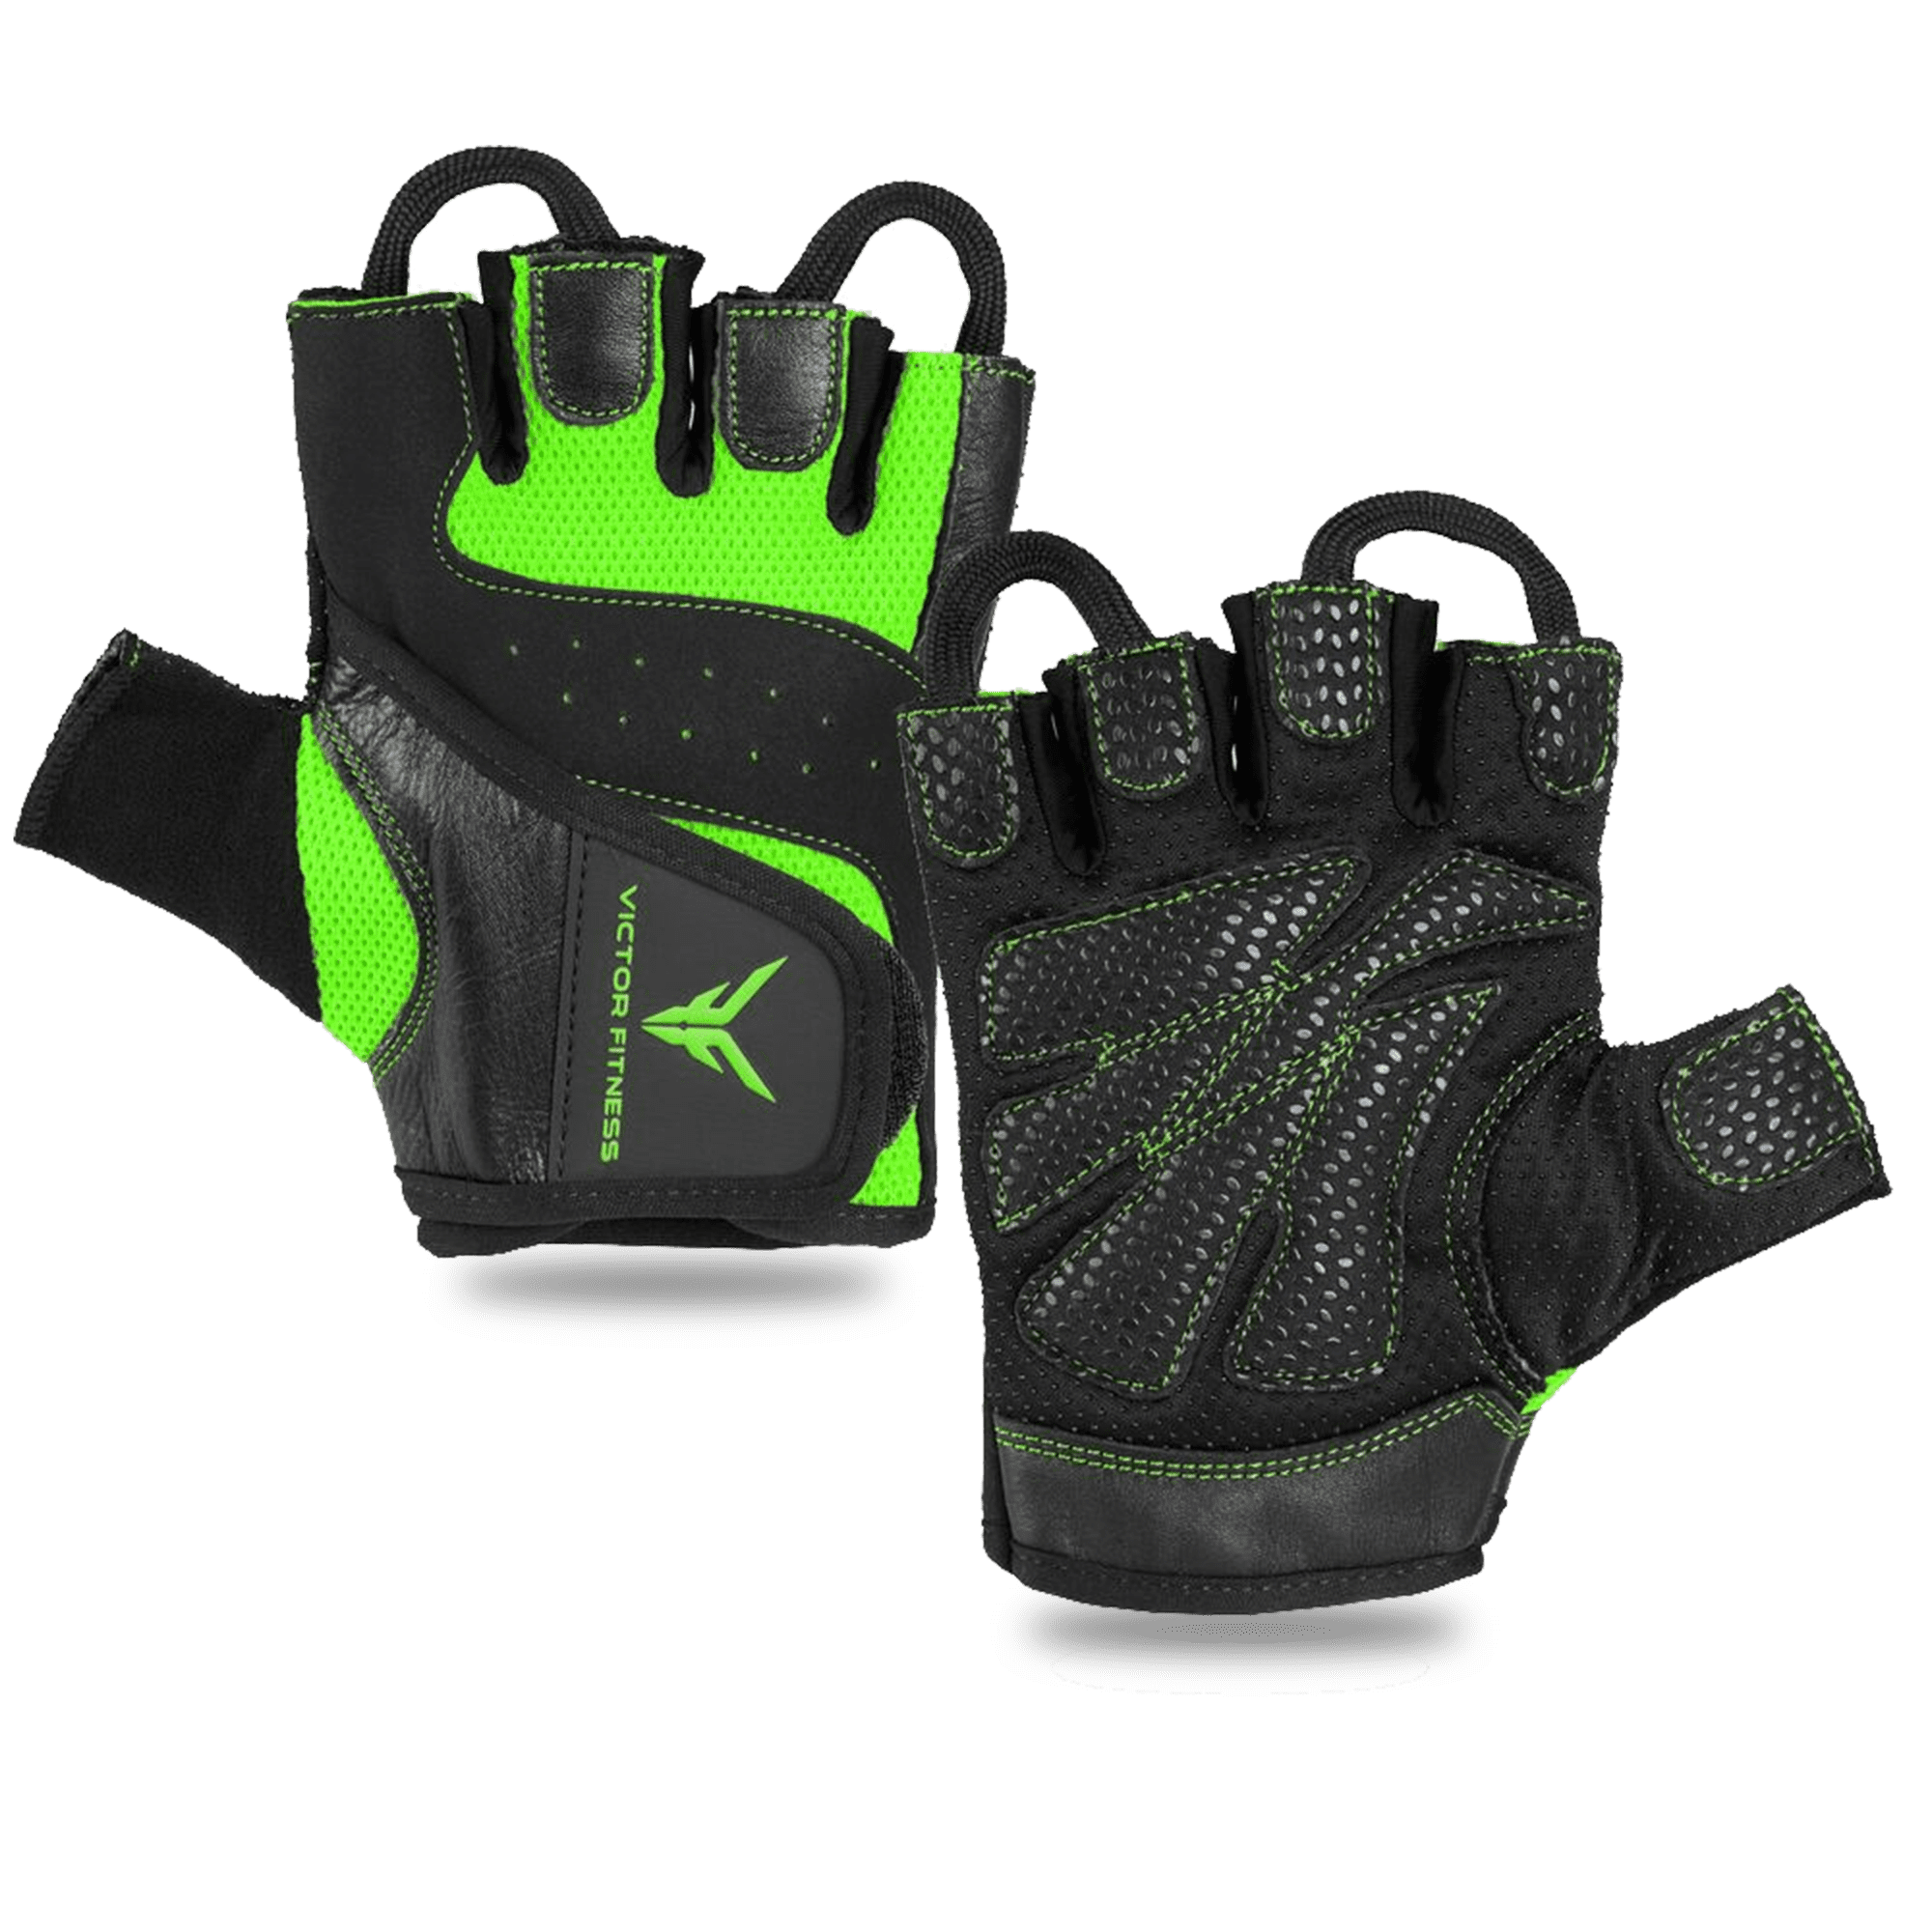 Series-5 Fingerless Leather Men's Weightlifting Gloves with Full Palm